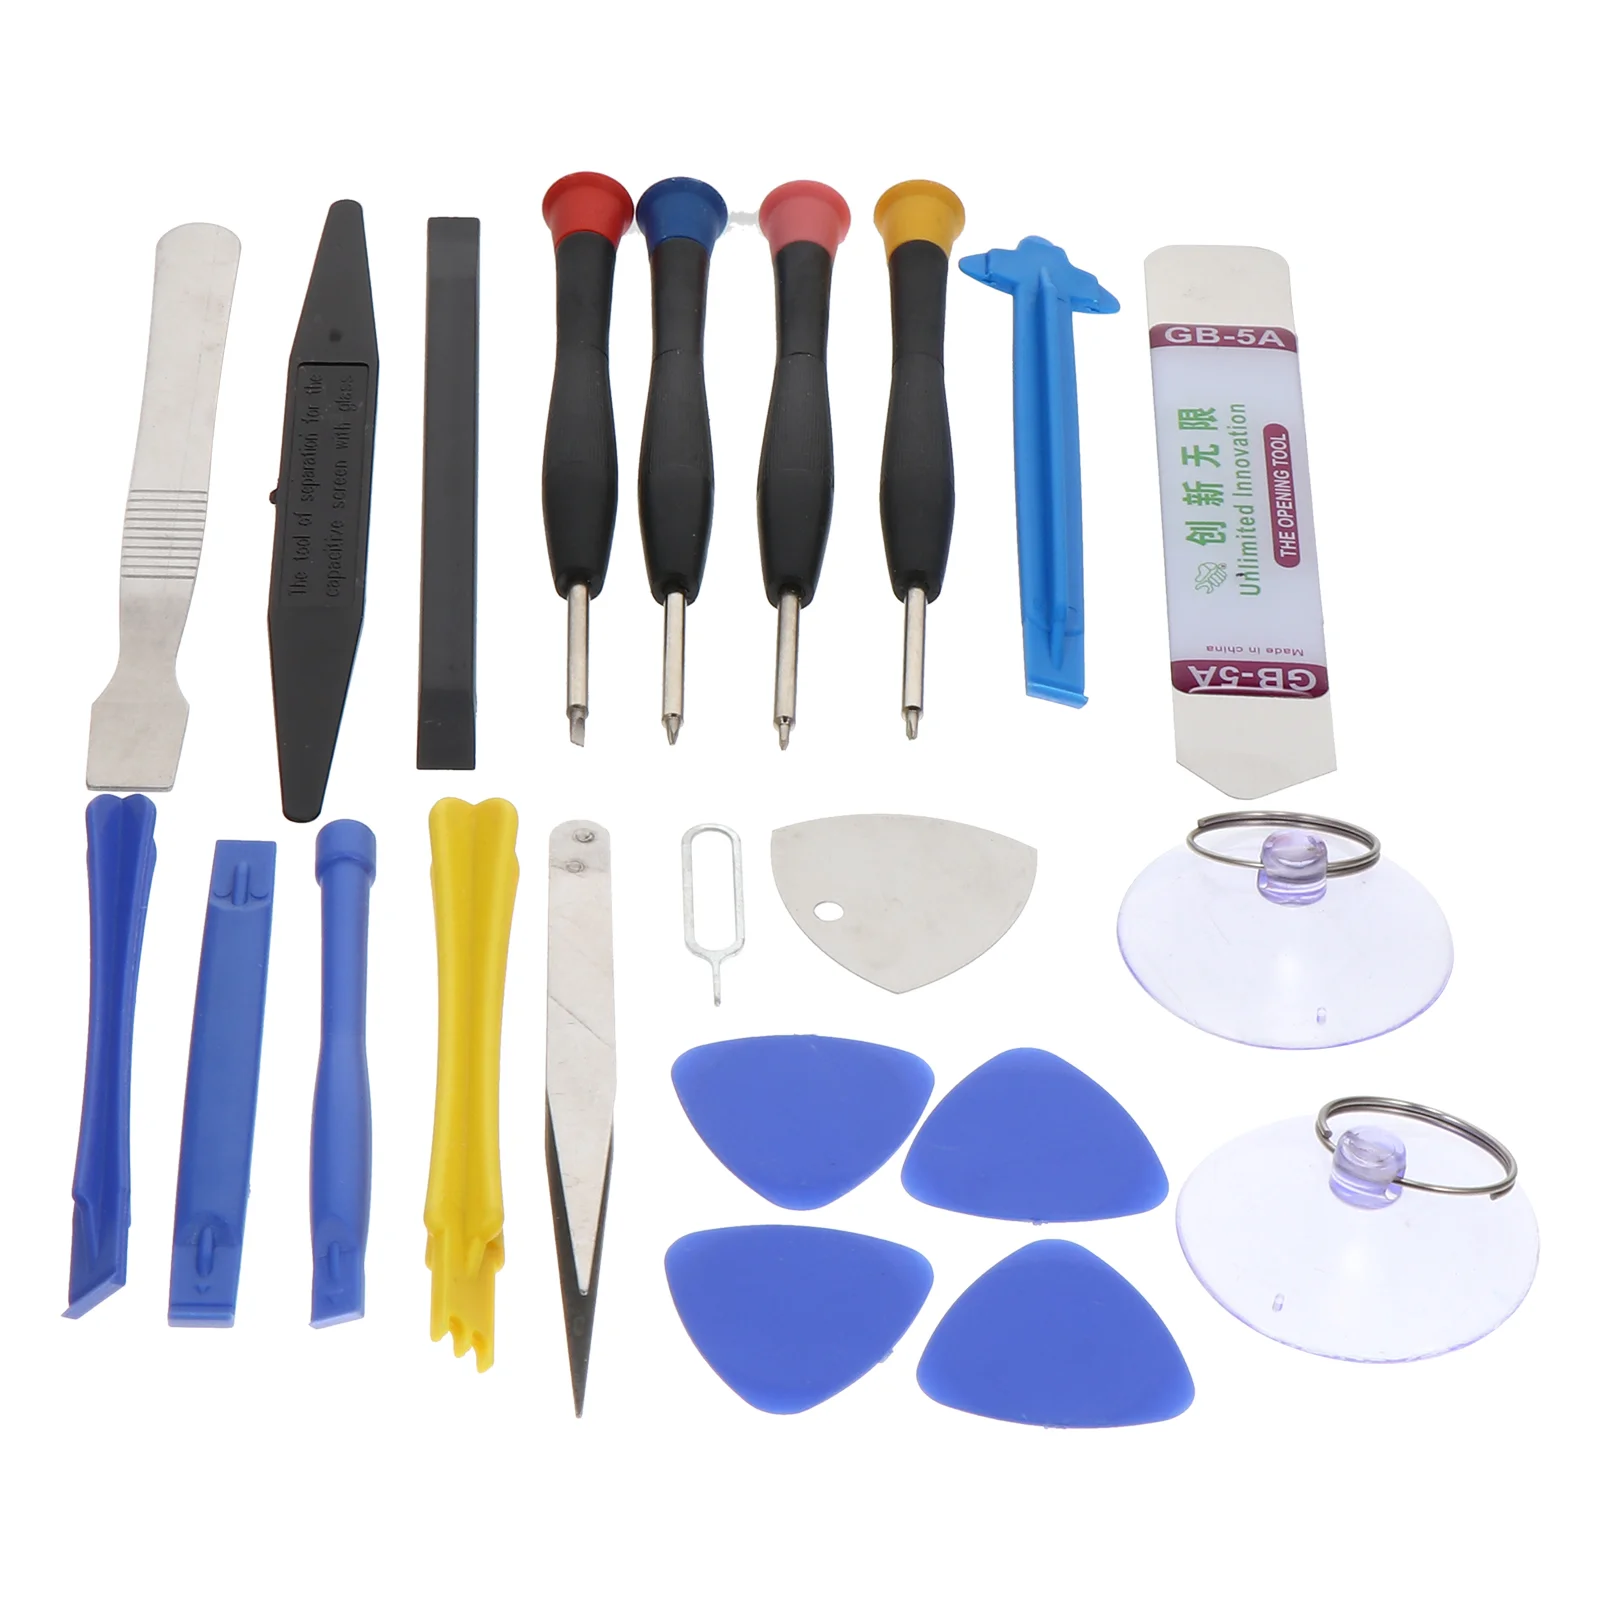 

Screen Repair Tool Mobile Phone Disassembly Multitool Screwdrivers Tablet Pry Disassemble LCD Carbon Steel Opening Tools